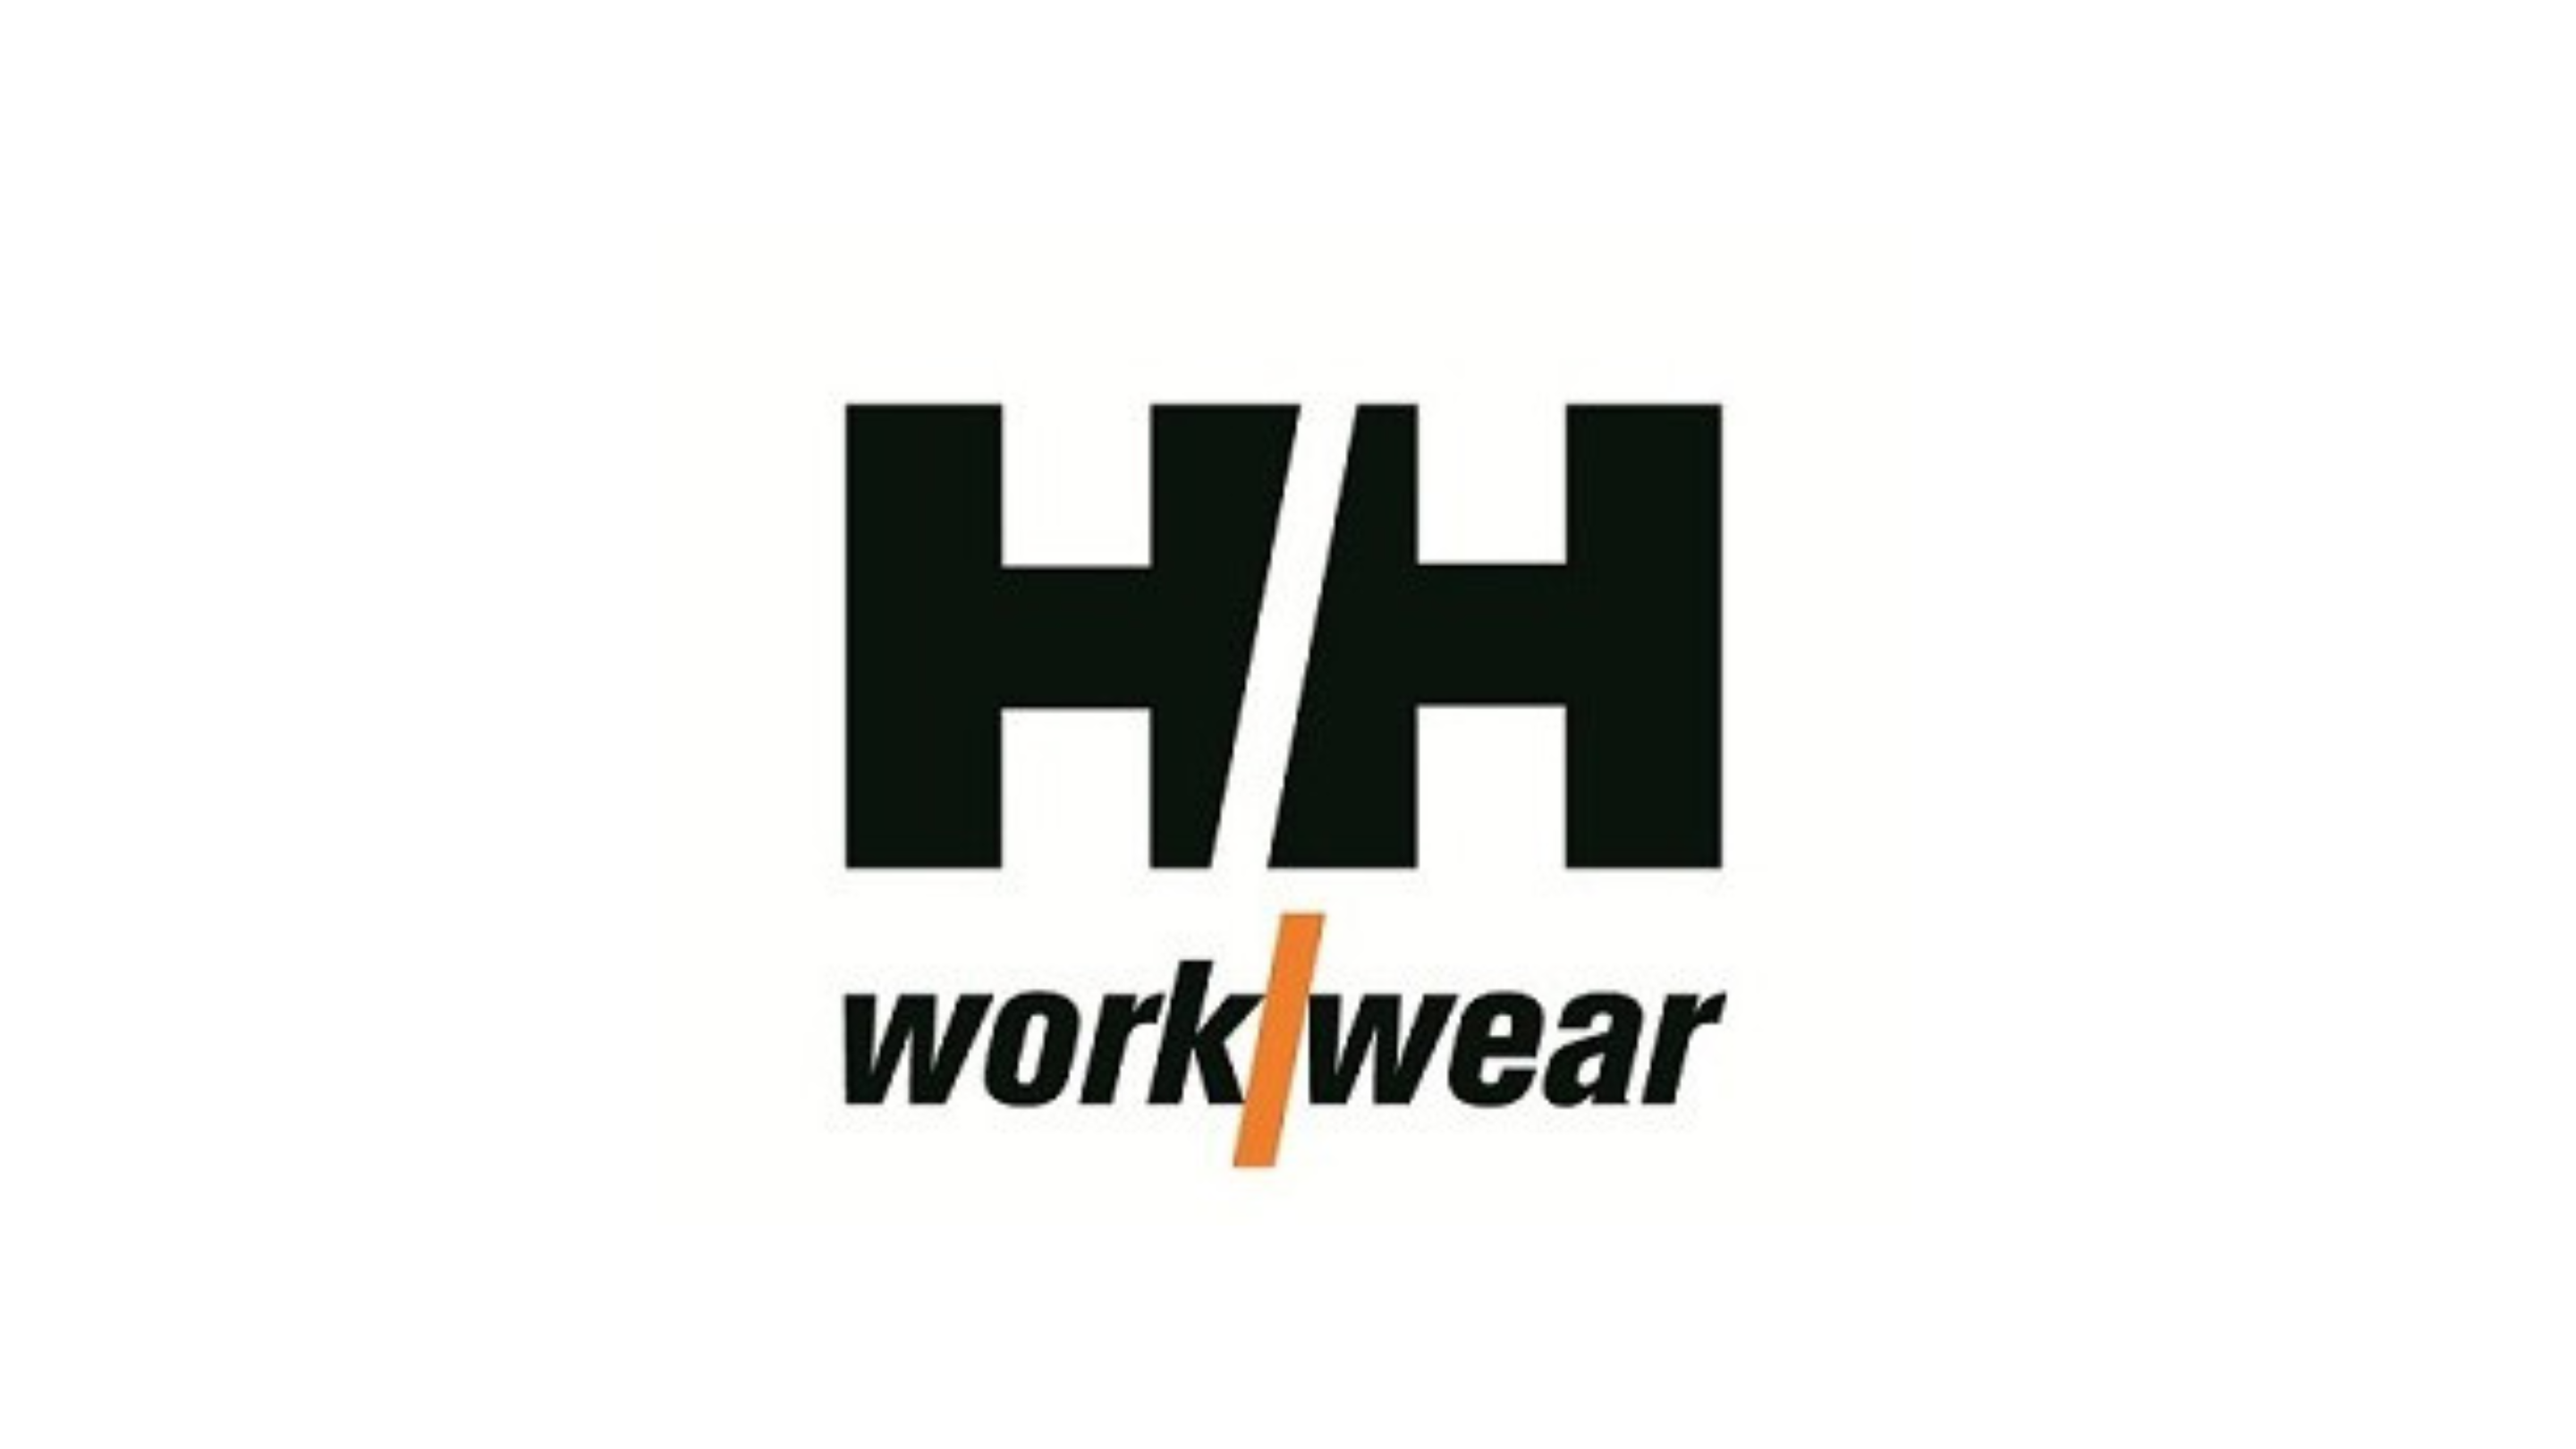 Work coveralls - 71695 - HELLY HANSEN Work Wear - waterproof /  high-visibility / polyester